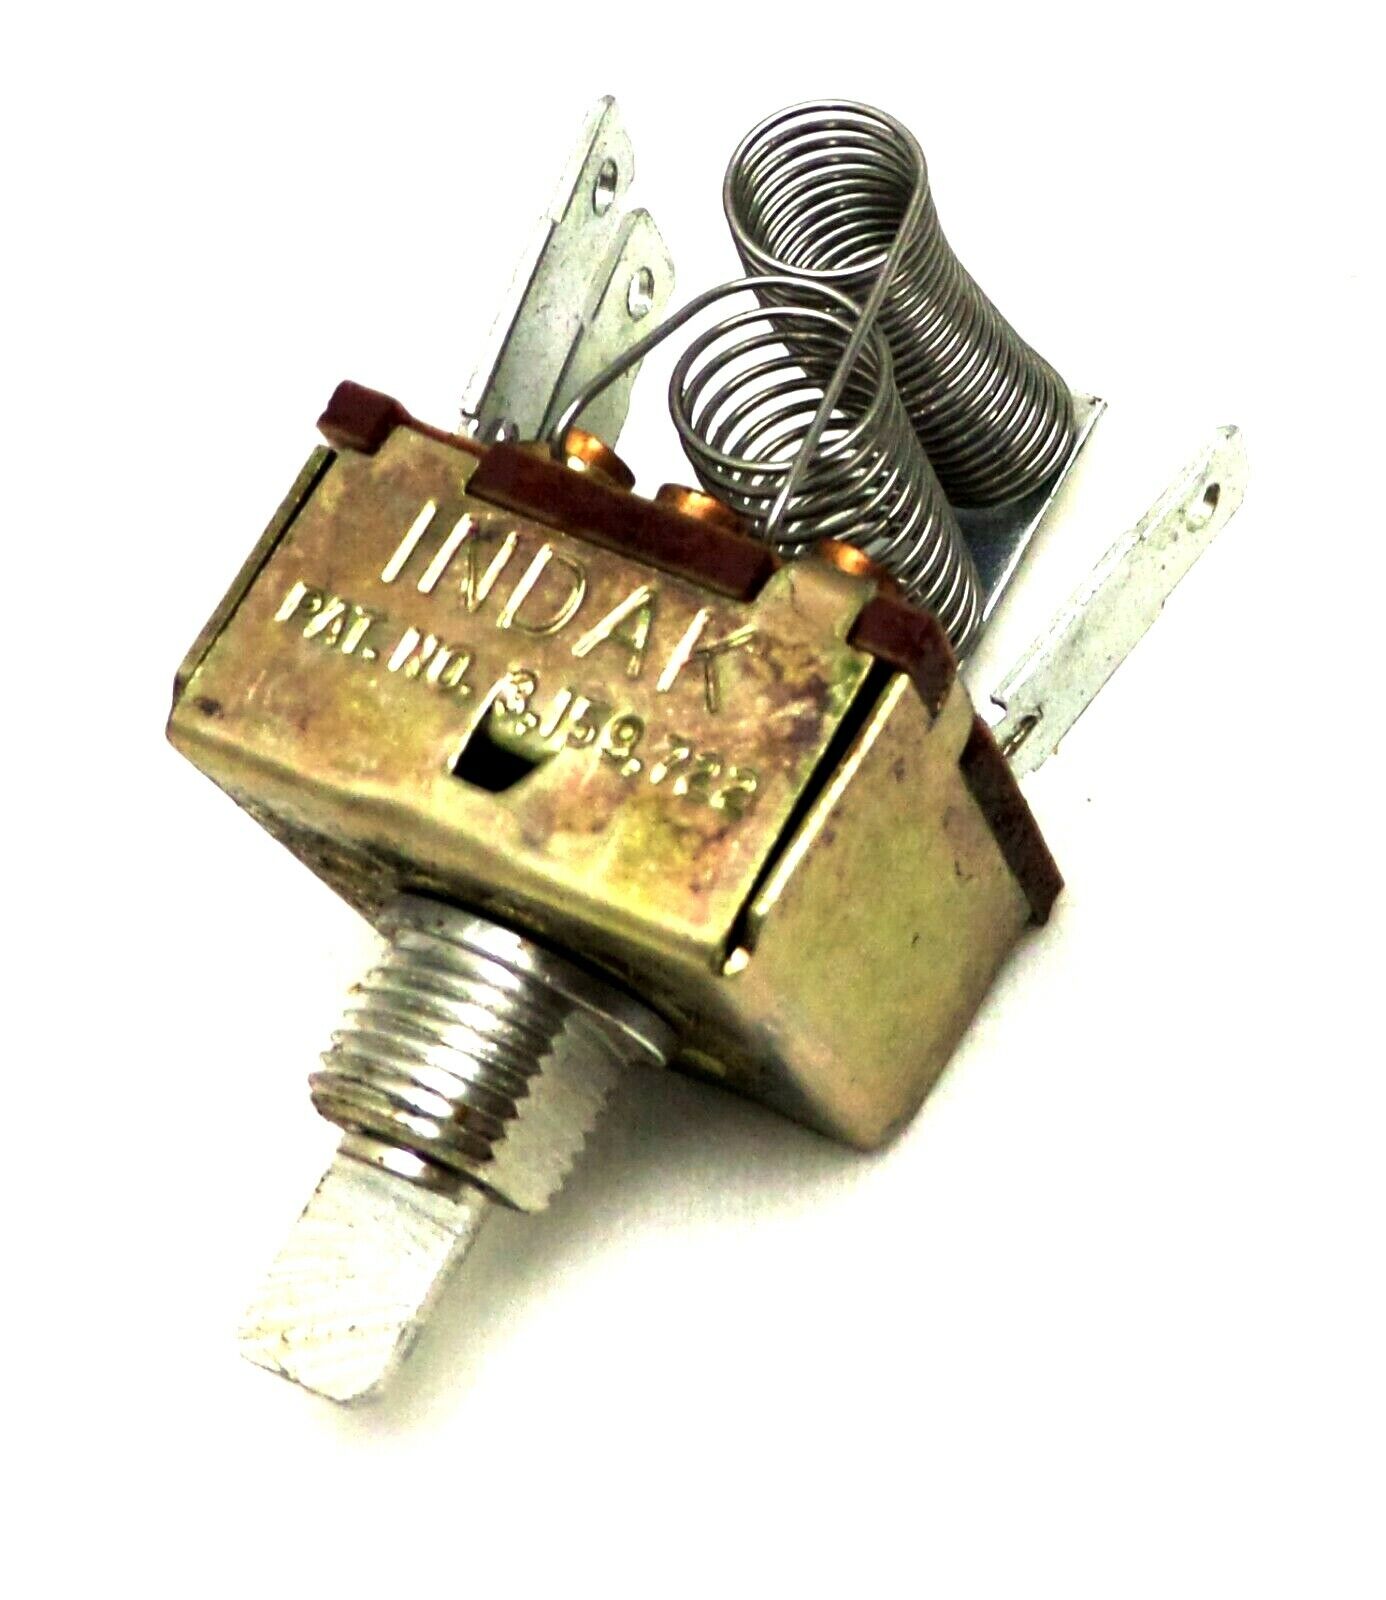 3.159.722 New NOS Indak Rotary Heather Blower Switch 12 Volts 3 Speed 3 Leads